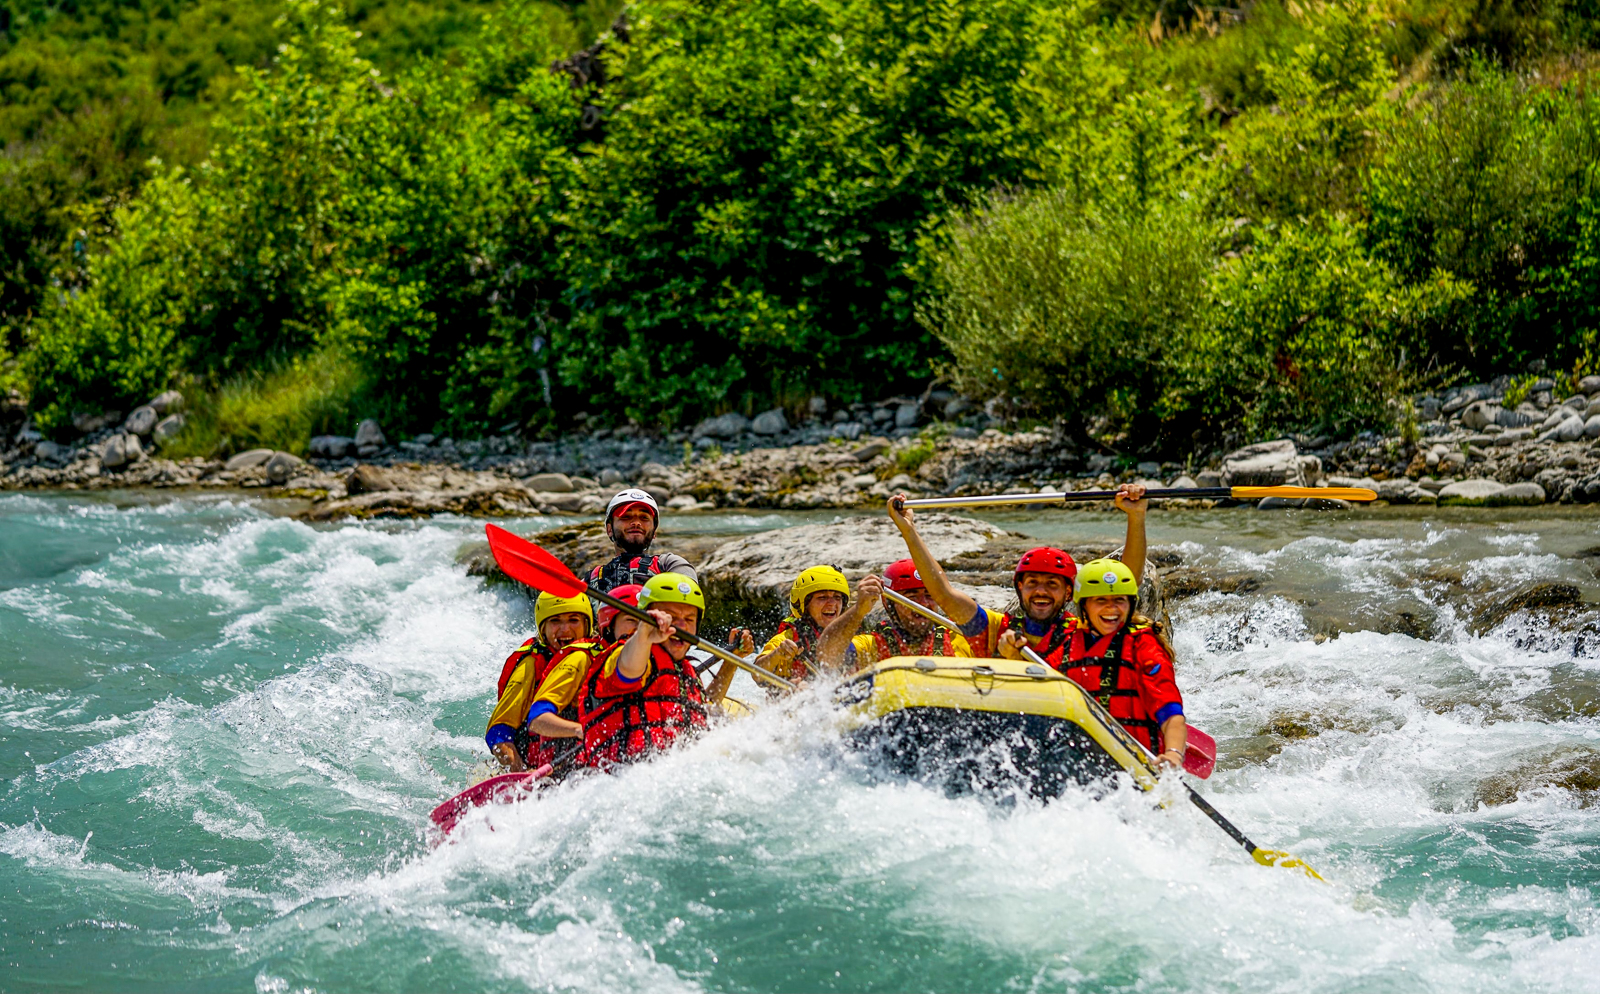 A group white water rafting in Costa Rica